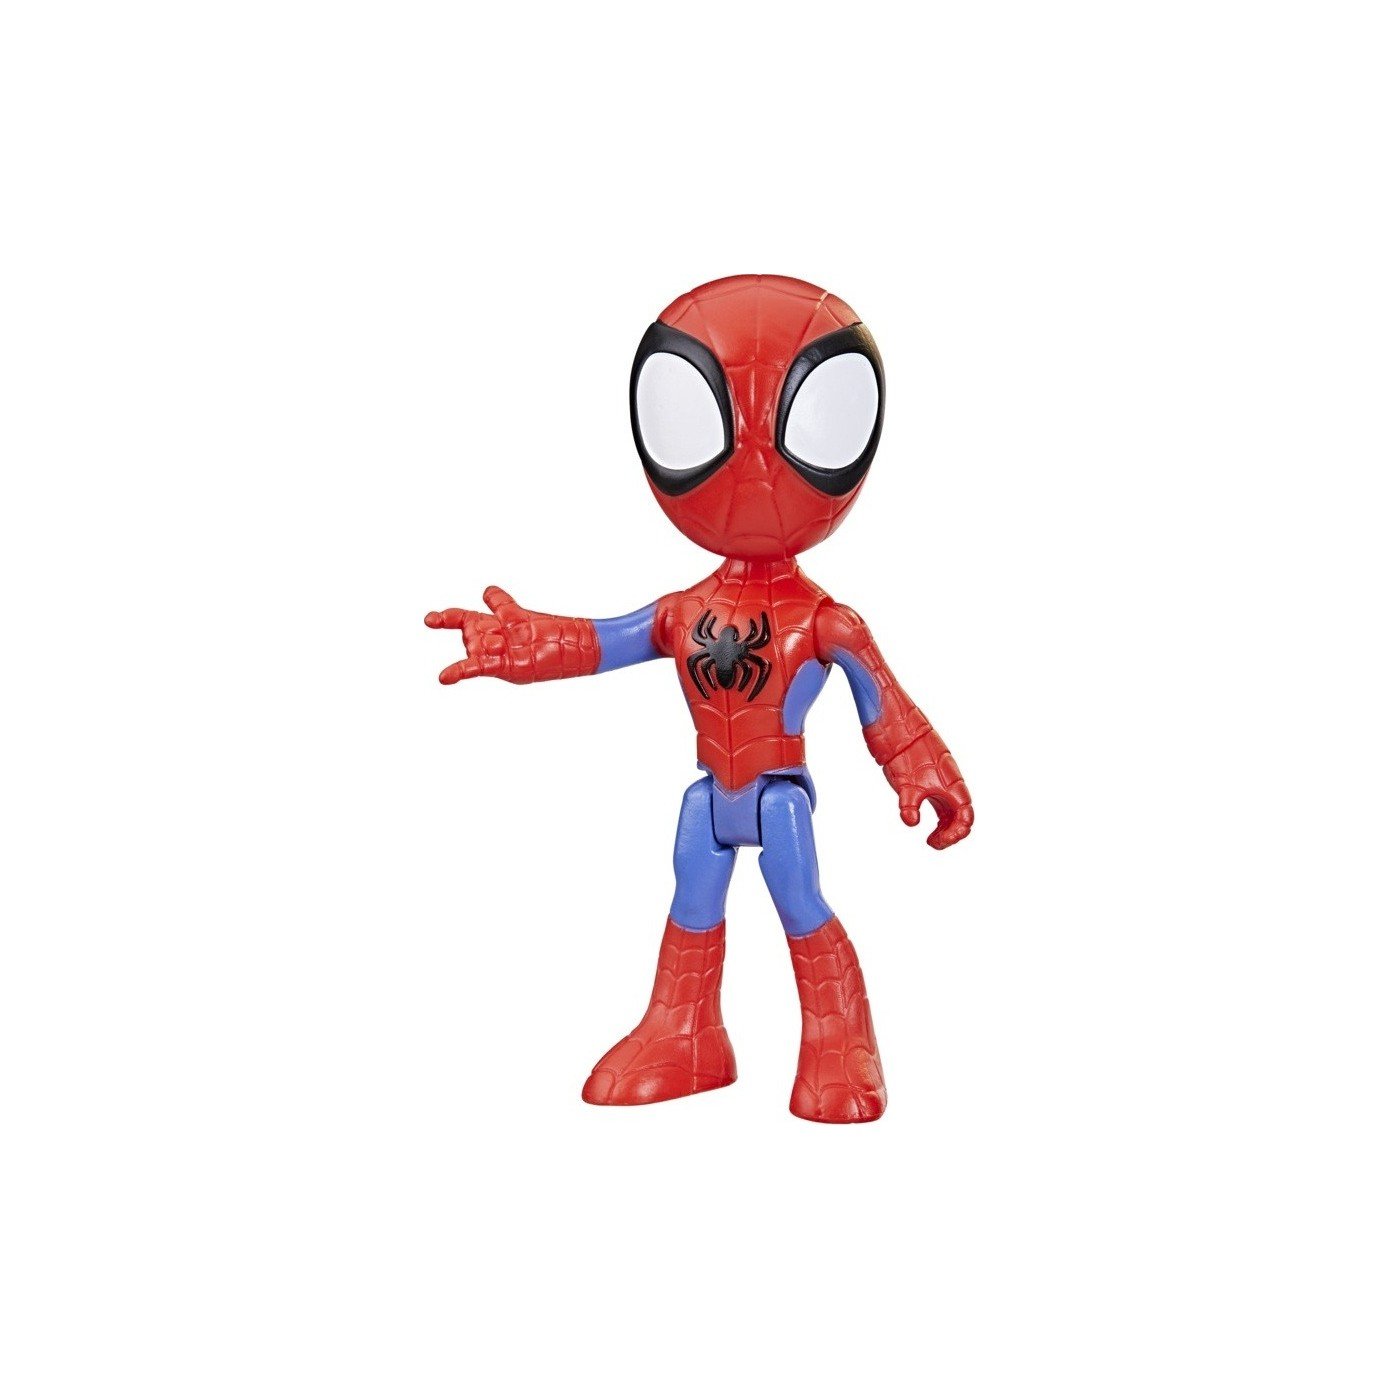 Marvel Spidey and his Amazing Friends Spidey Surprise - 10pk (Target  Exclusive)